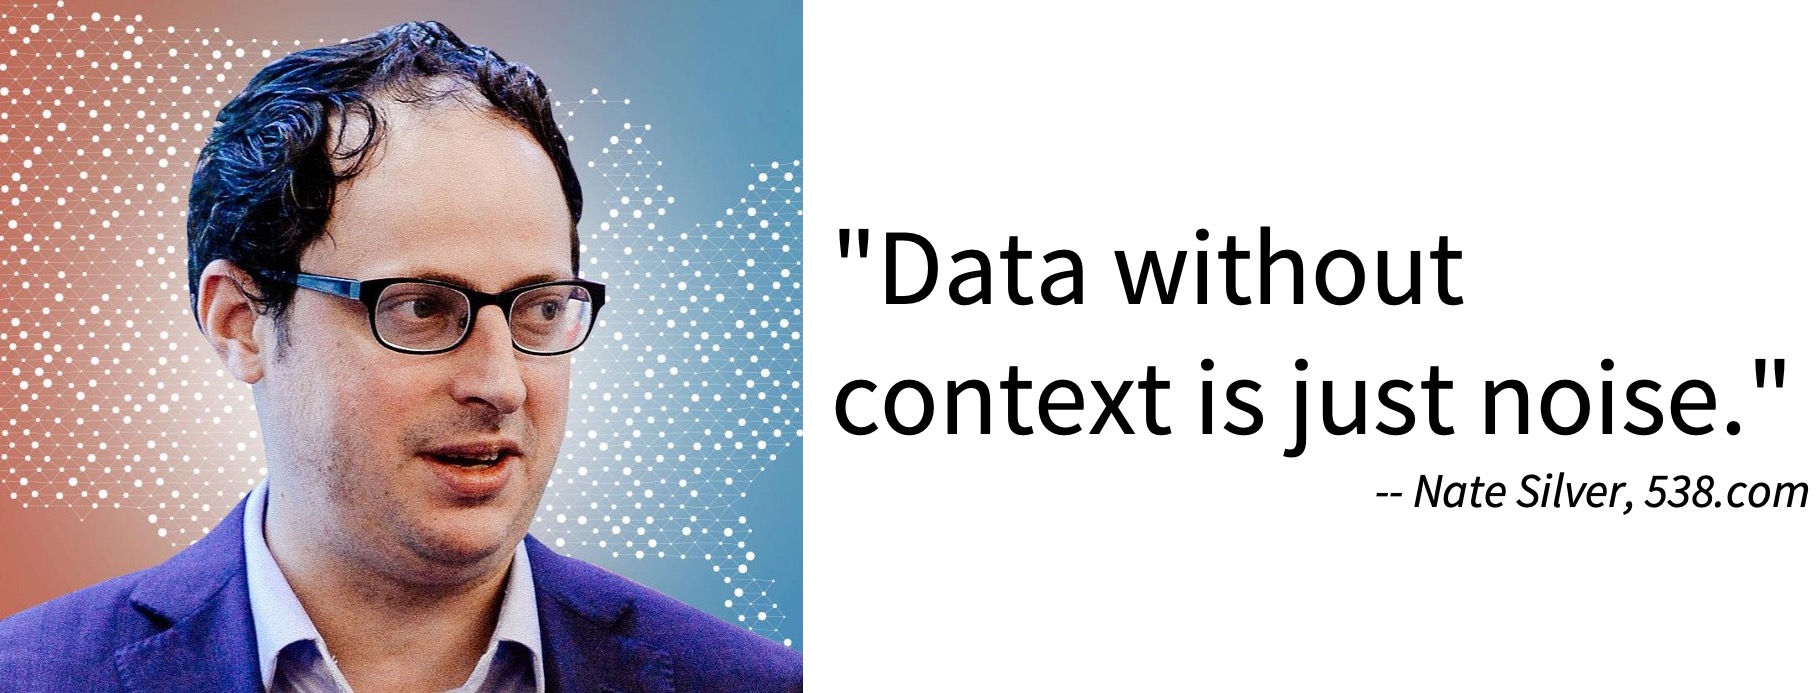 nate silver of 538 says data without context is just noise